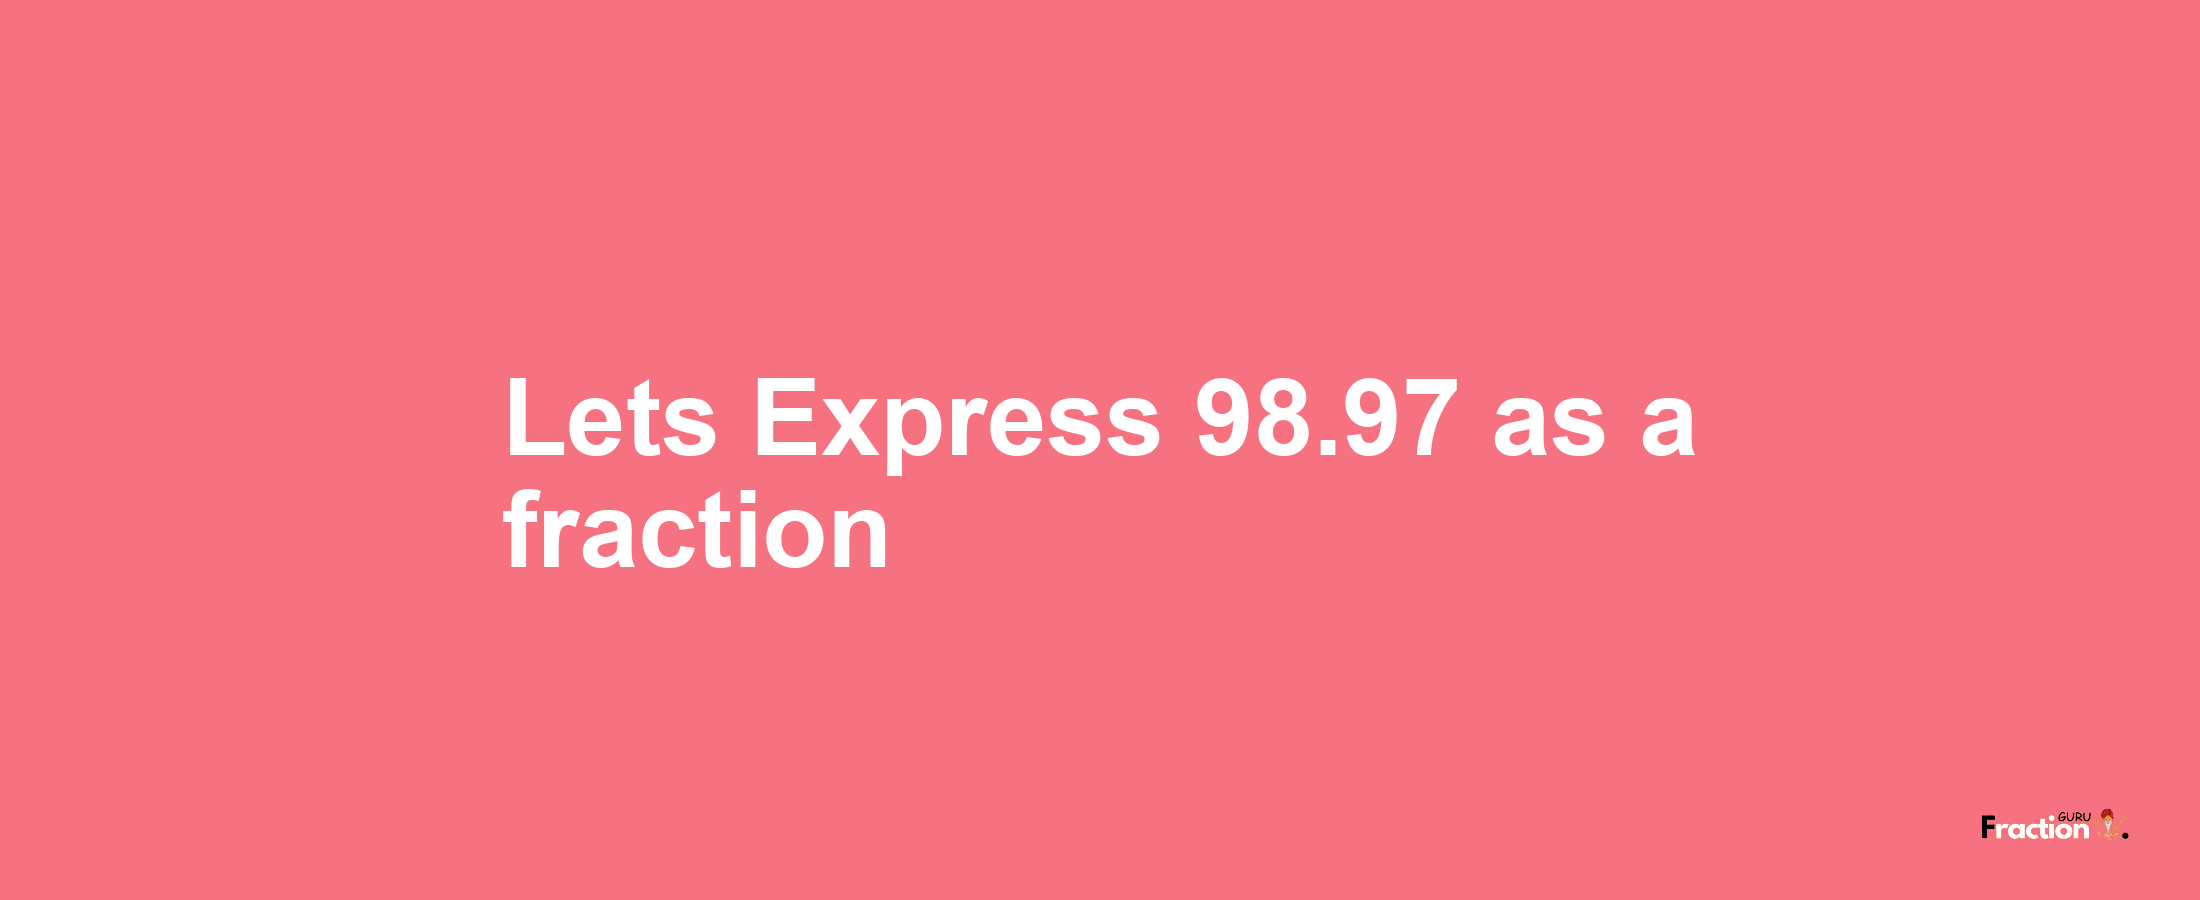 Lets Express 98.97 as afraction